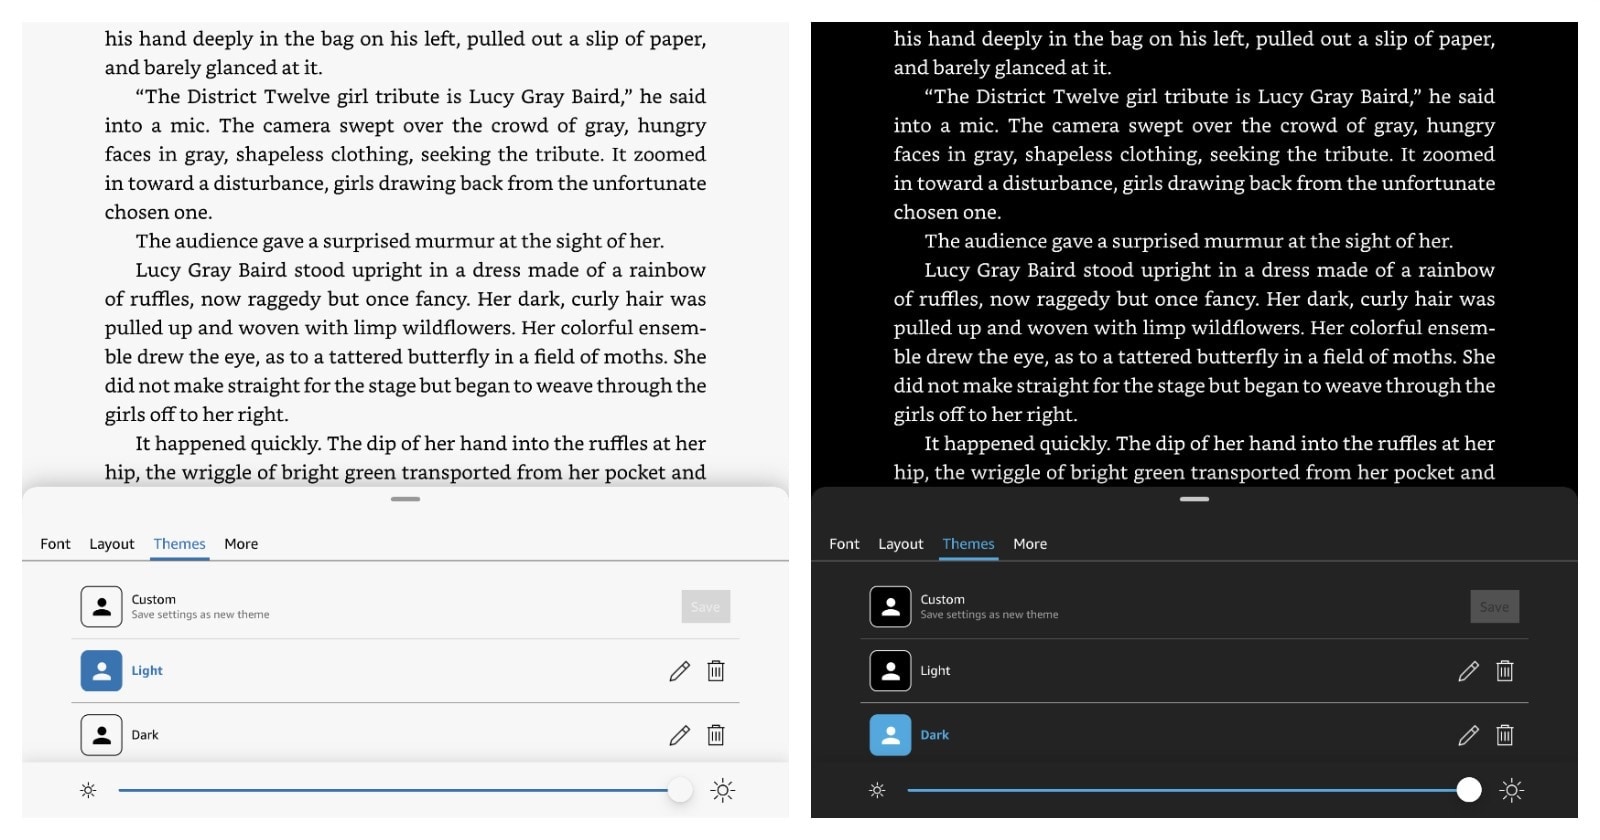 Kindle app for iPad lets you finally create your own themes